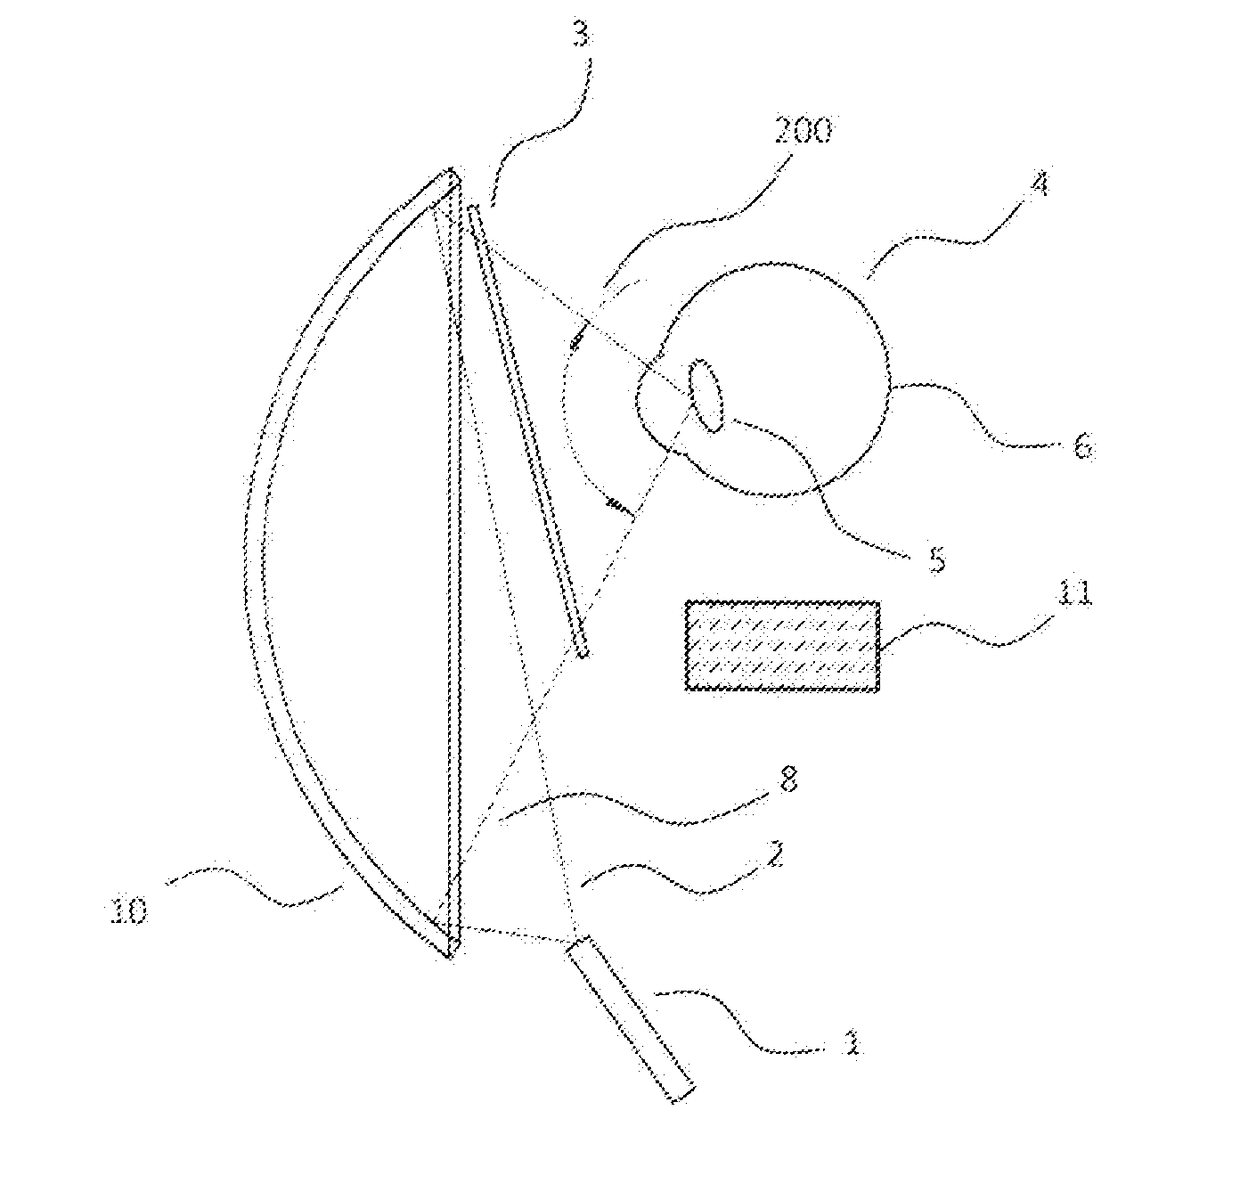 Head mounted display with directional panel illumination unit